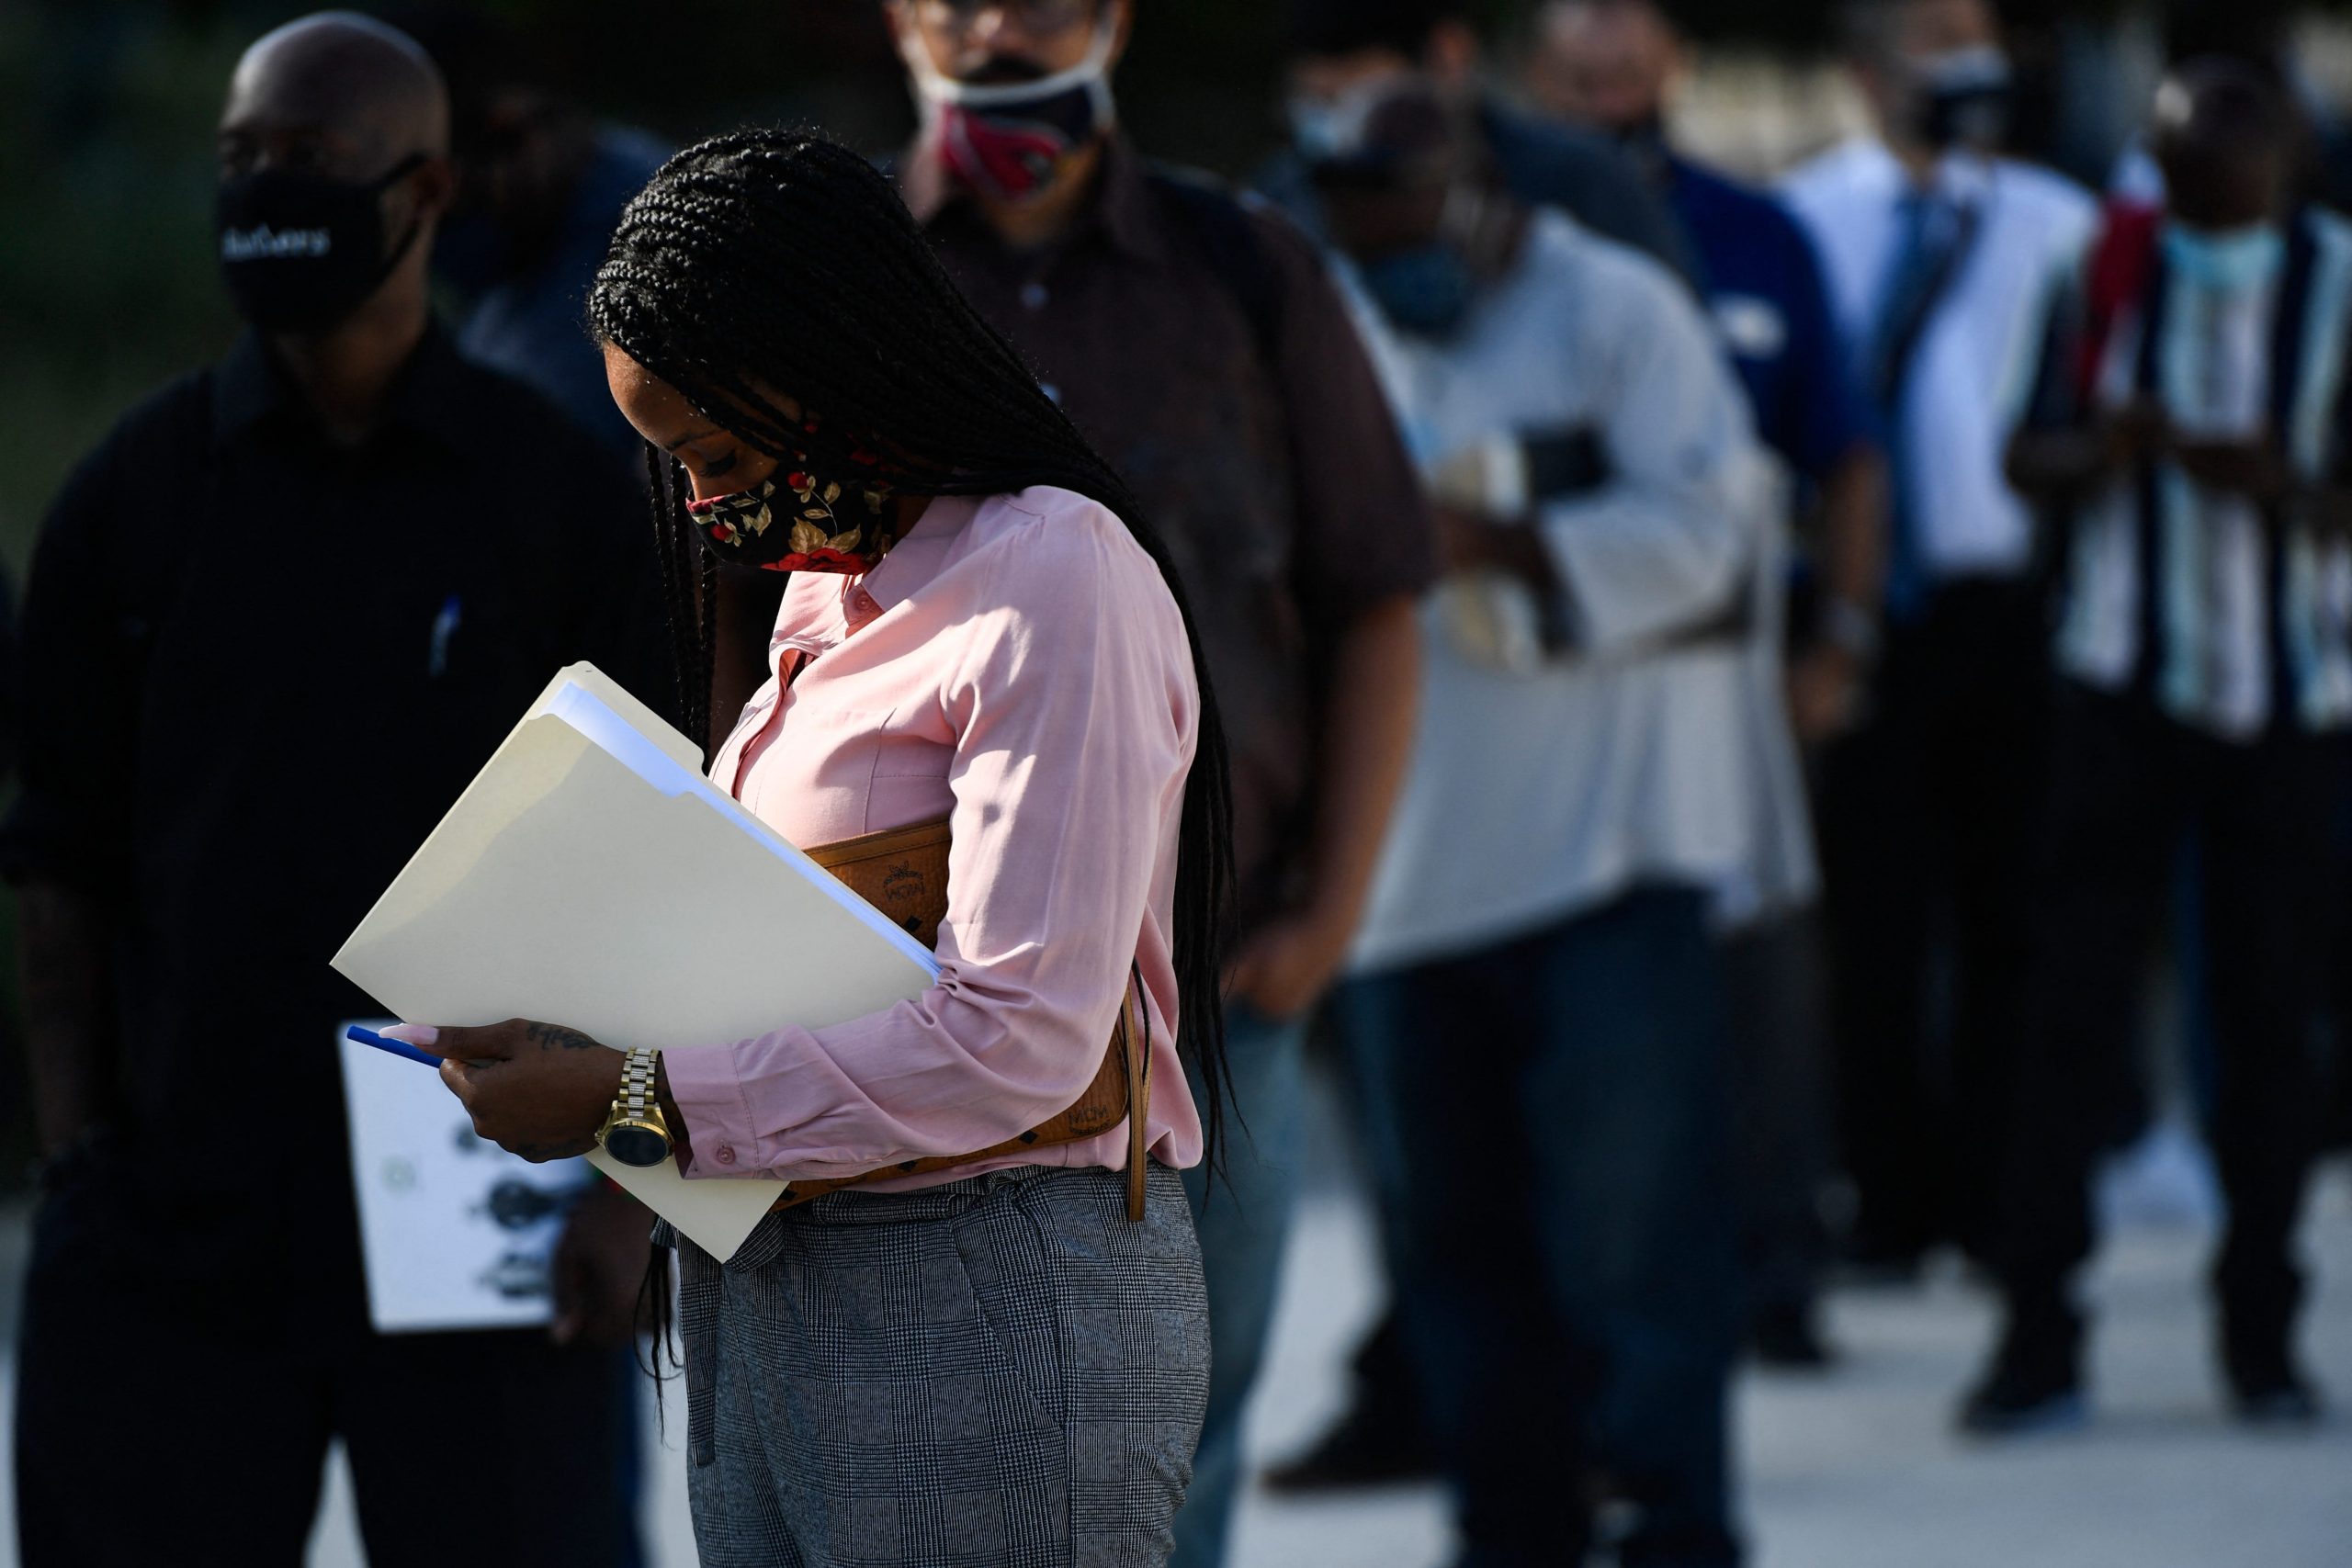 A woman in a pink shirt holds a folder in a line at a job fair in Los Angeles